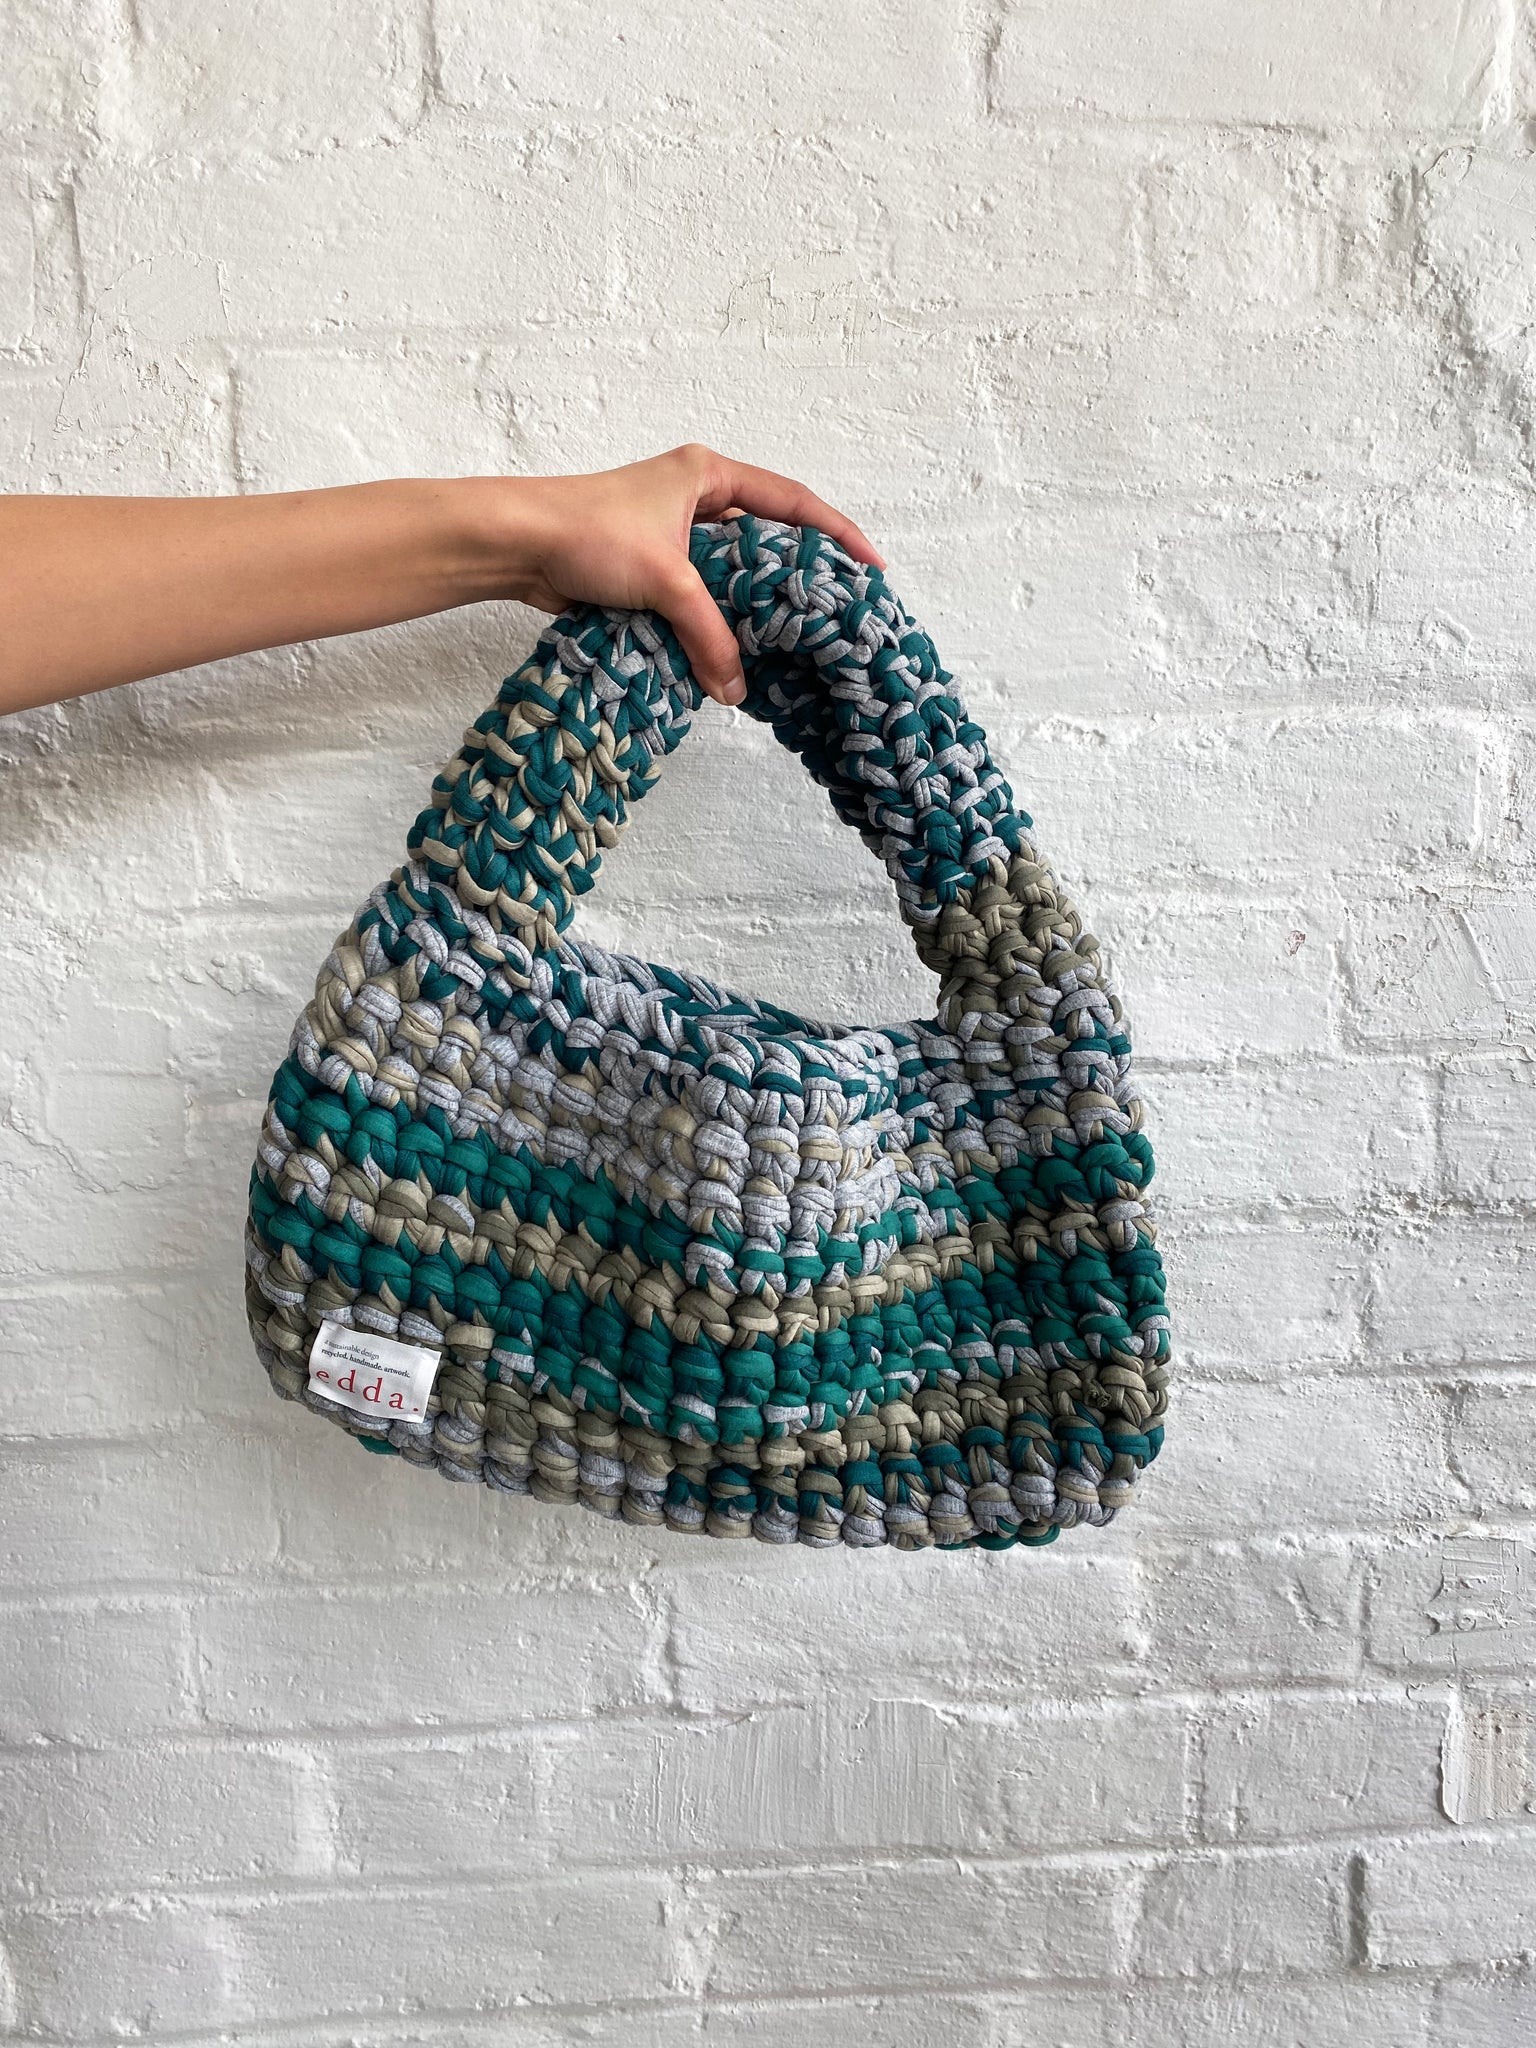 Edda - Medium Slouchy Grey/ Green - Error404store. Knitted/weaved blue and green handbag. Sustainably handmade from recycled t-short material by Denmark designers Edda. Sold in Melbourne clothing boutique Error404store.